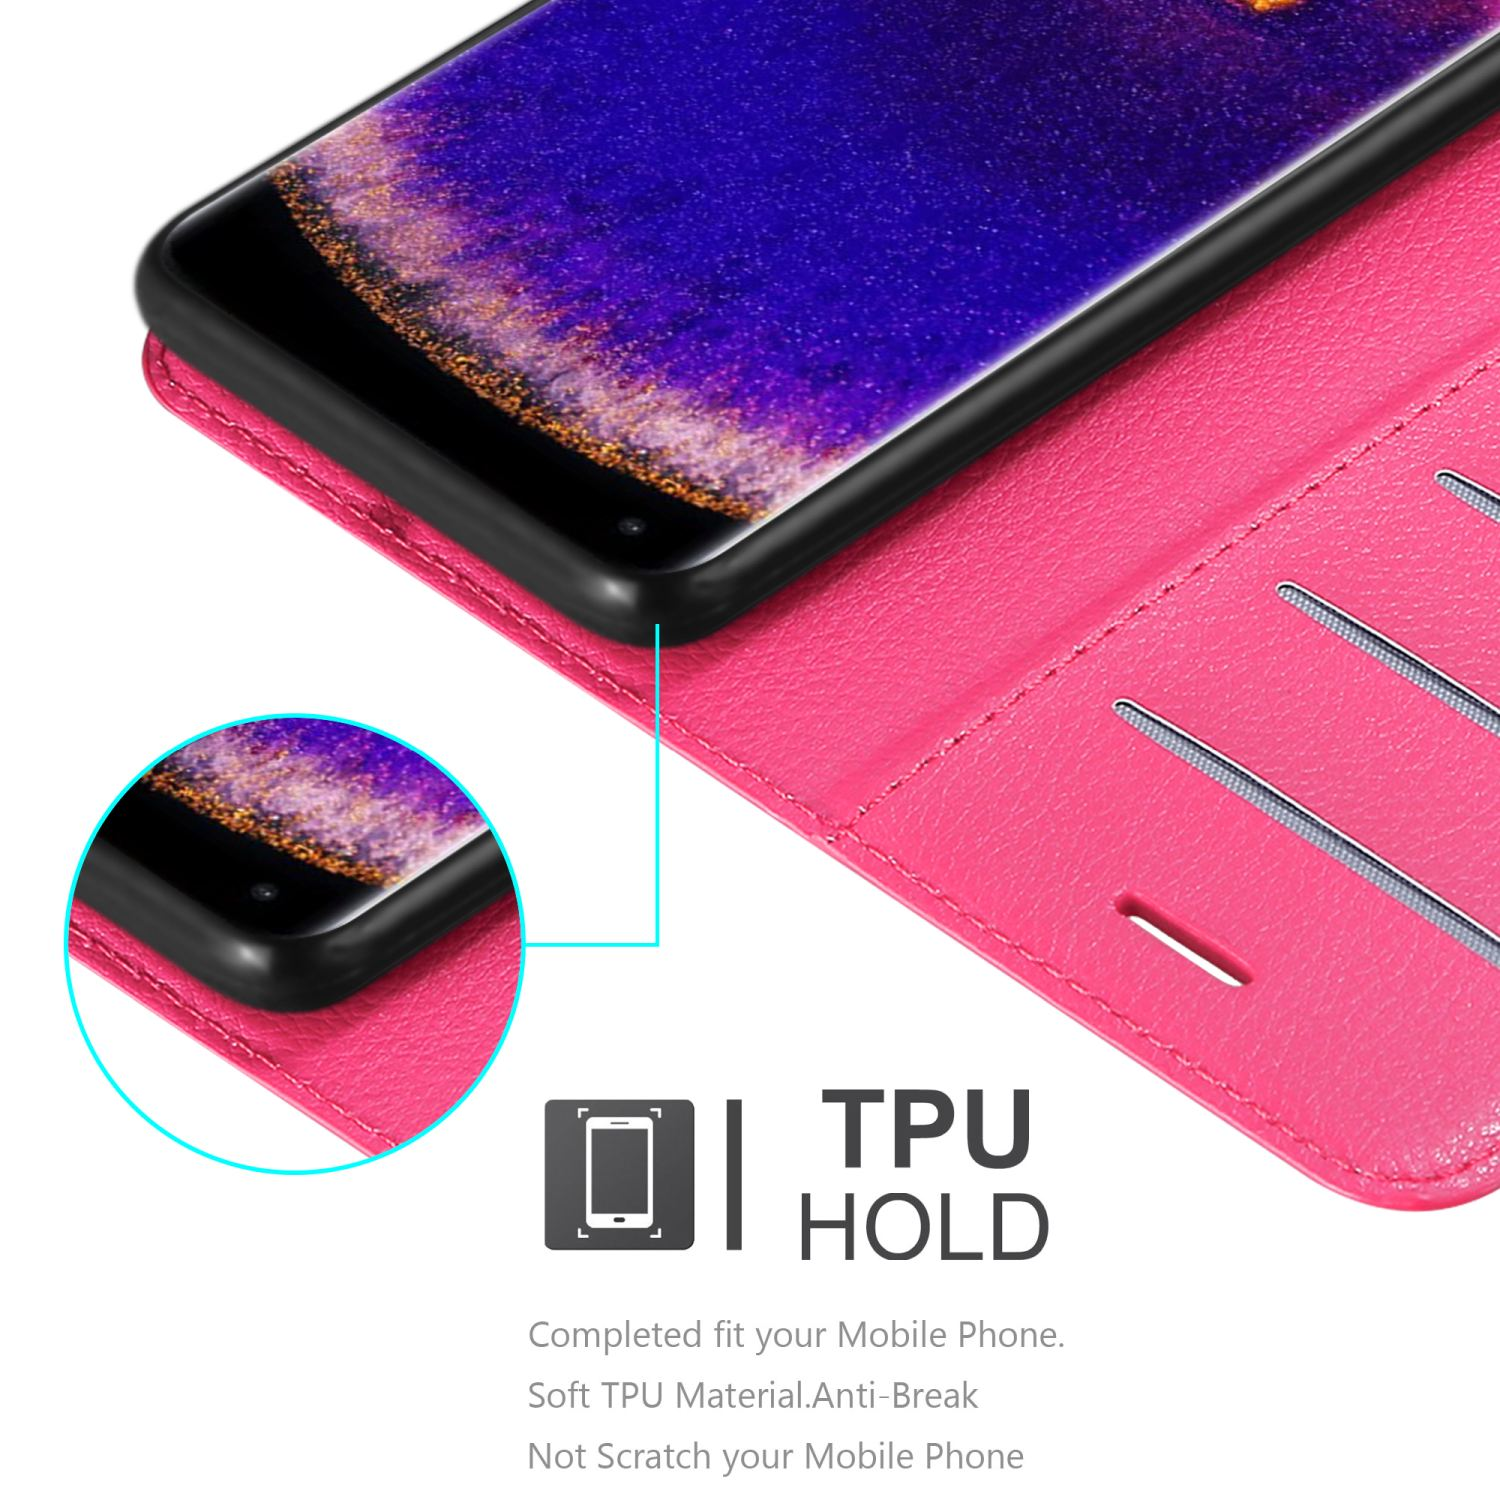 Bookcover, Hülle Book PRO, Oppo, PINK X5 FIND CHERRY Standfunktion, CADORABO